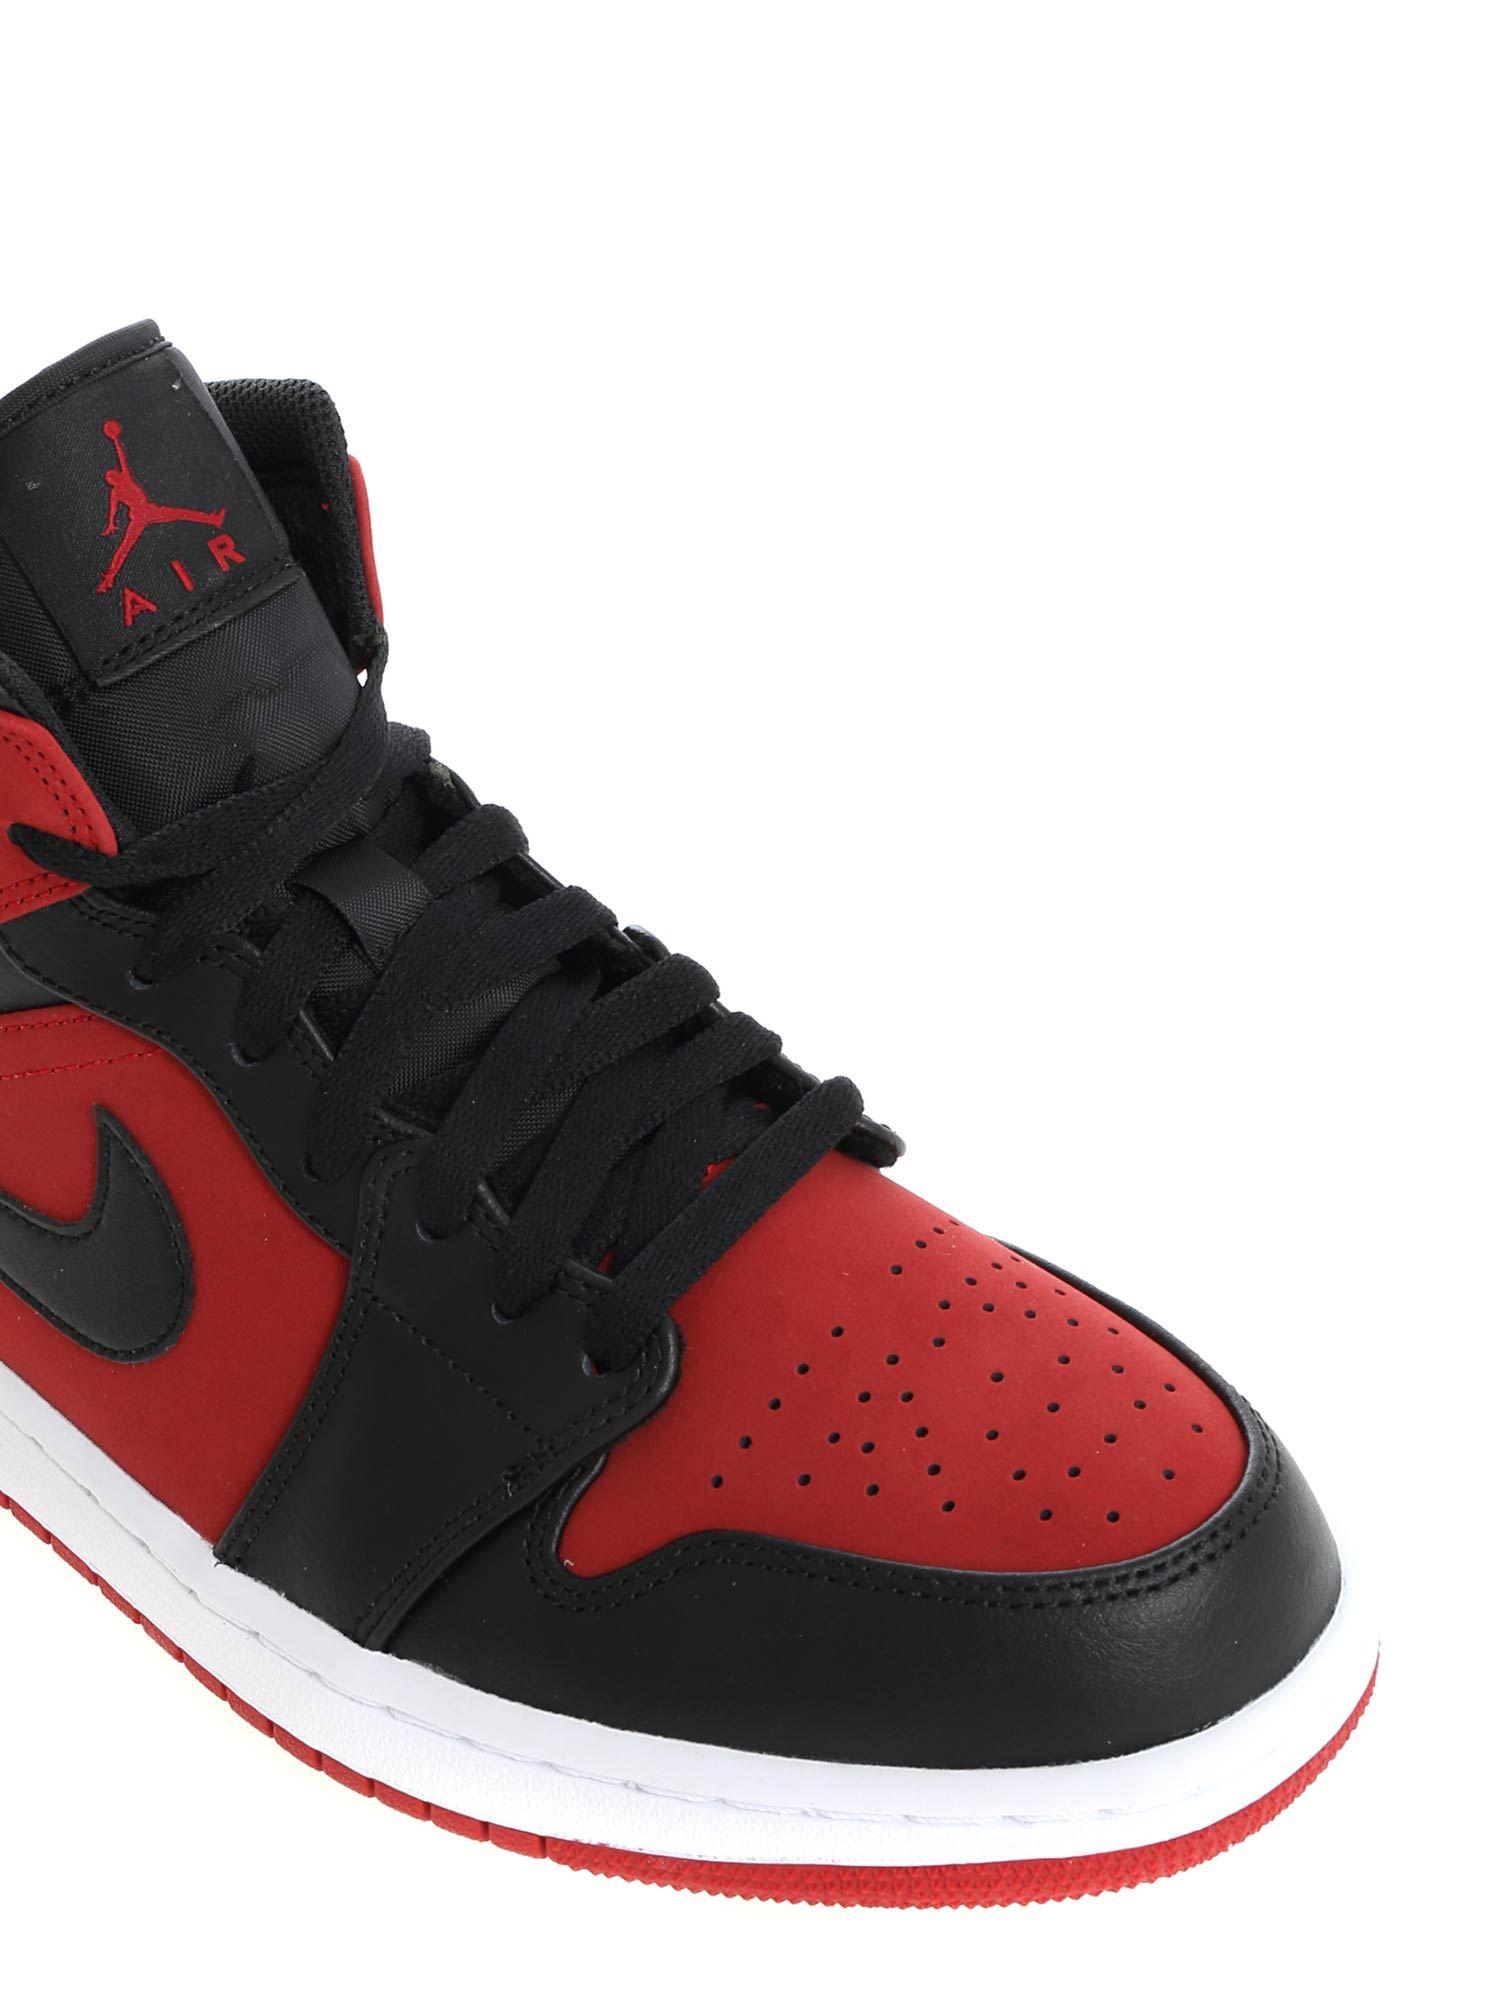 Nike Leather "air Jordan 1 Mid" Red And Black Sneakers for